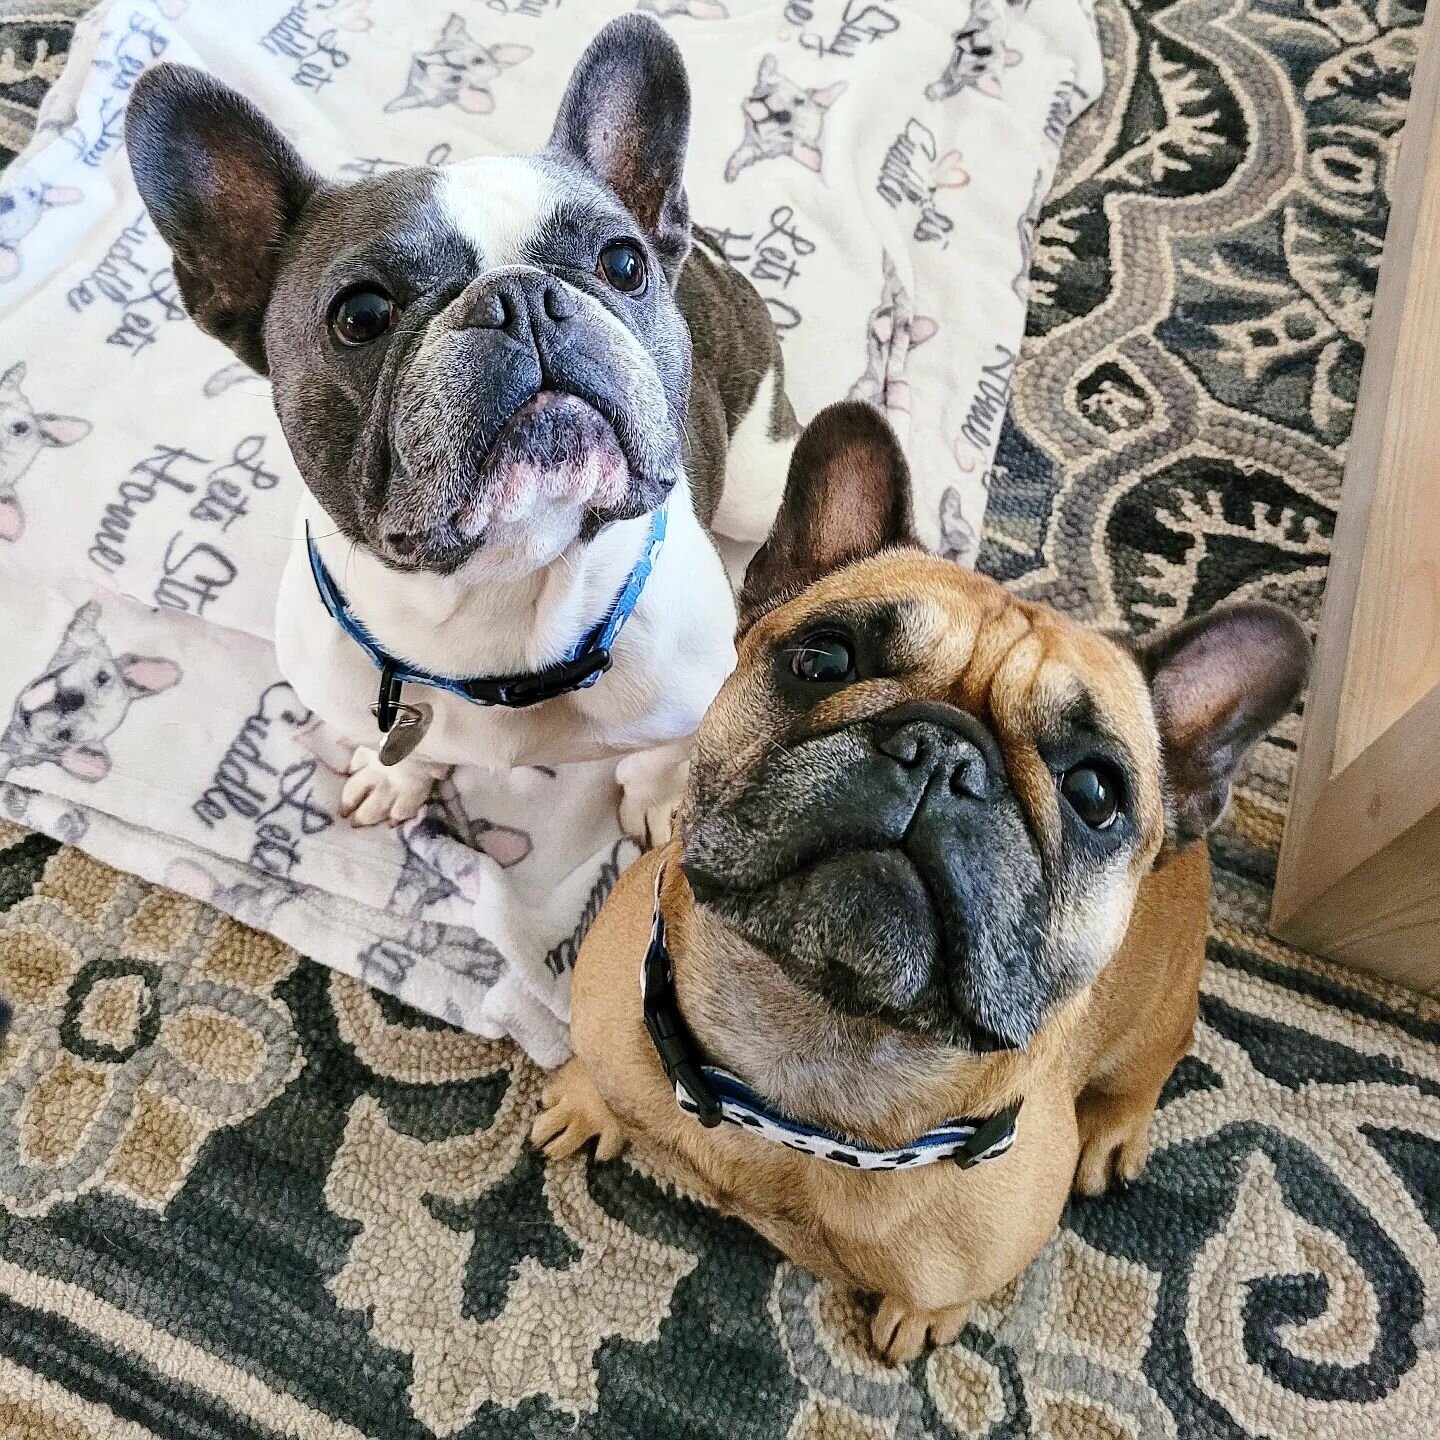 A happy week full of happy faces and now ready for a weekend of summer fun &amp; events! 

I am just beyond grateful to have weeks like these with such amazing clients &amp; furry friends. 🥰 #myheartisfull 
.
.
.
.
.
#morethanpets #frenchie #frenchb